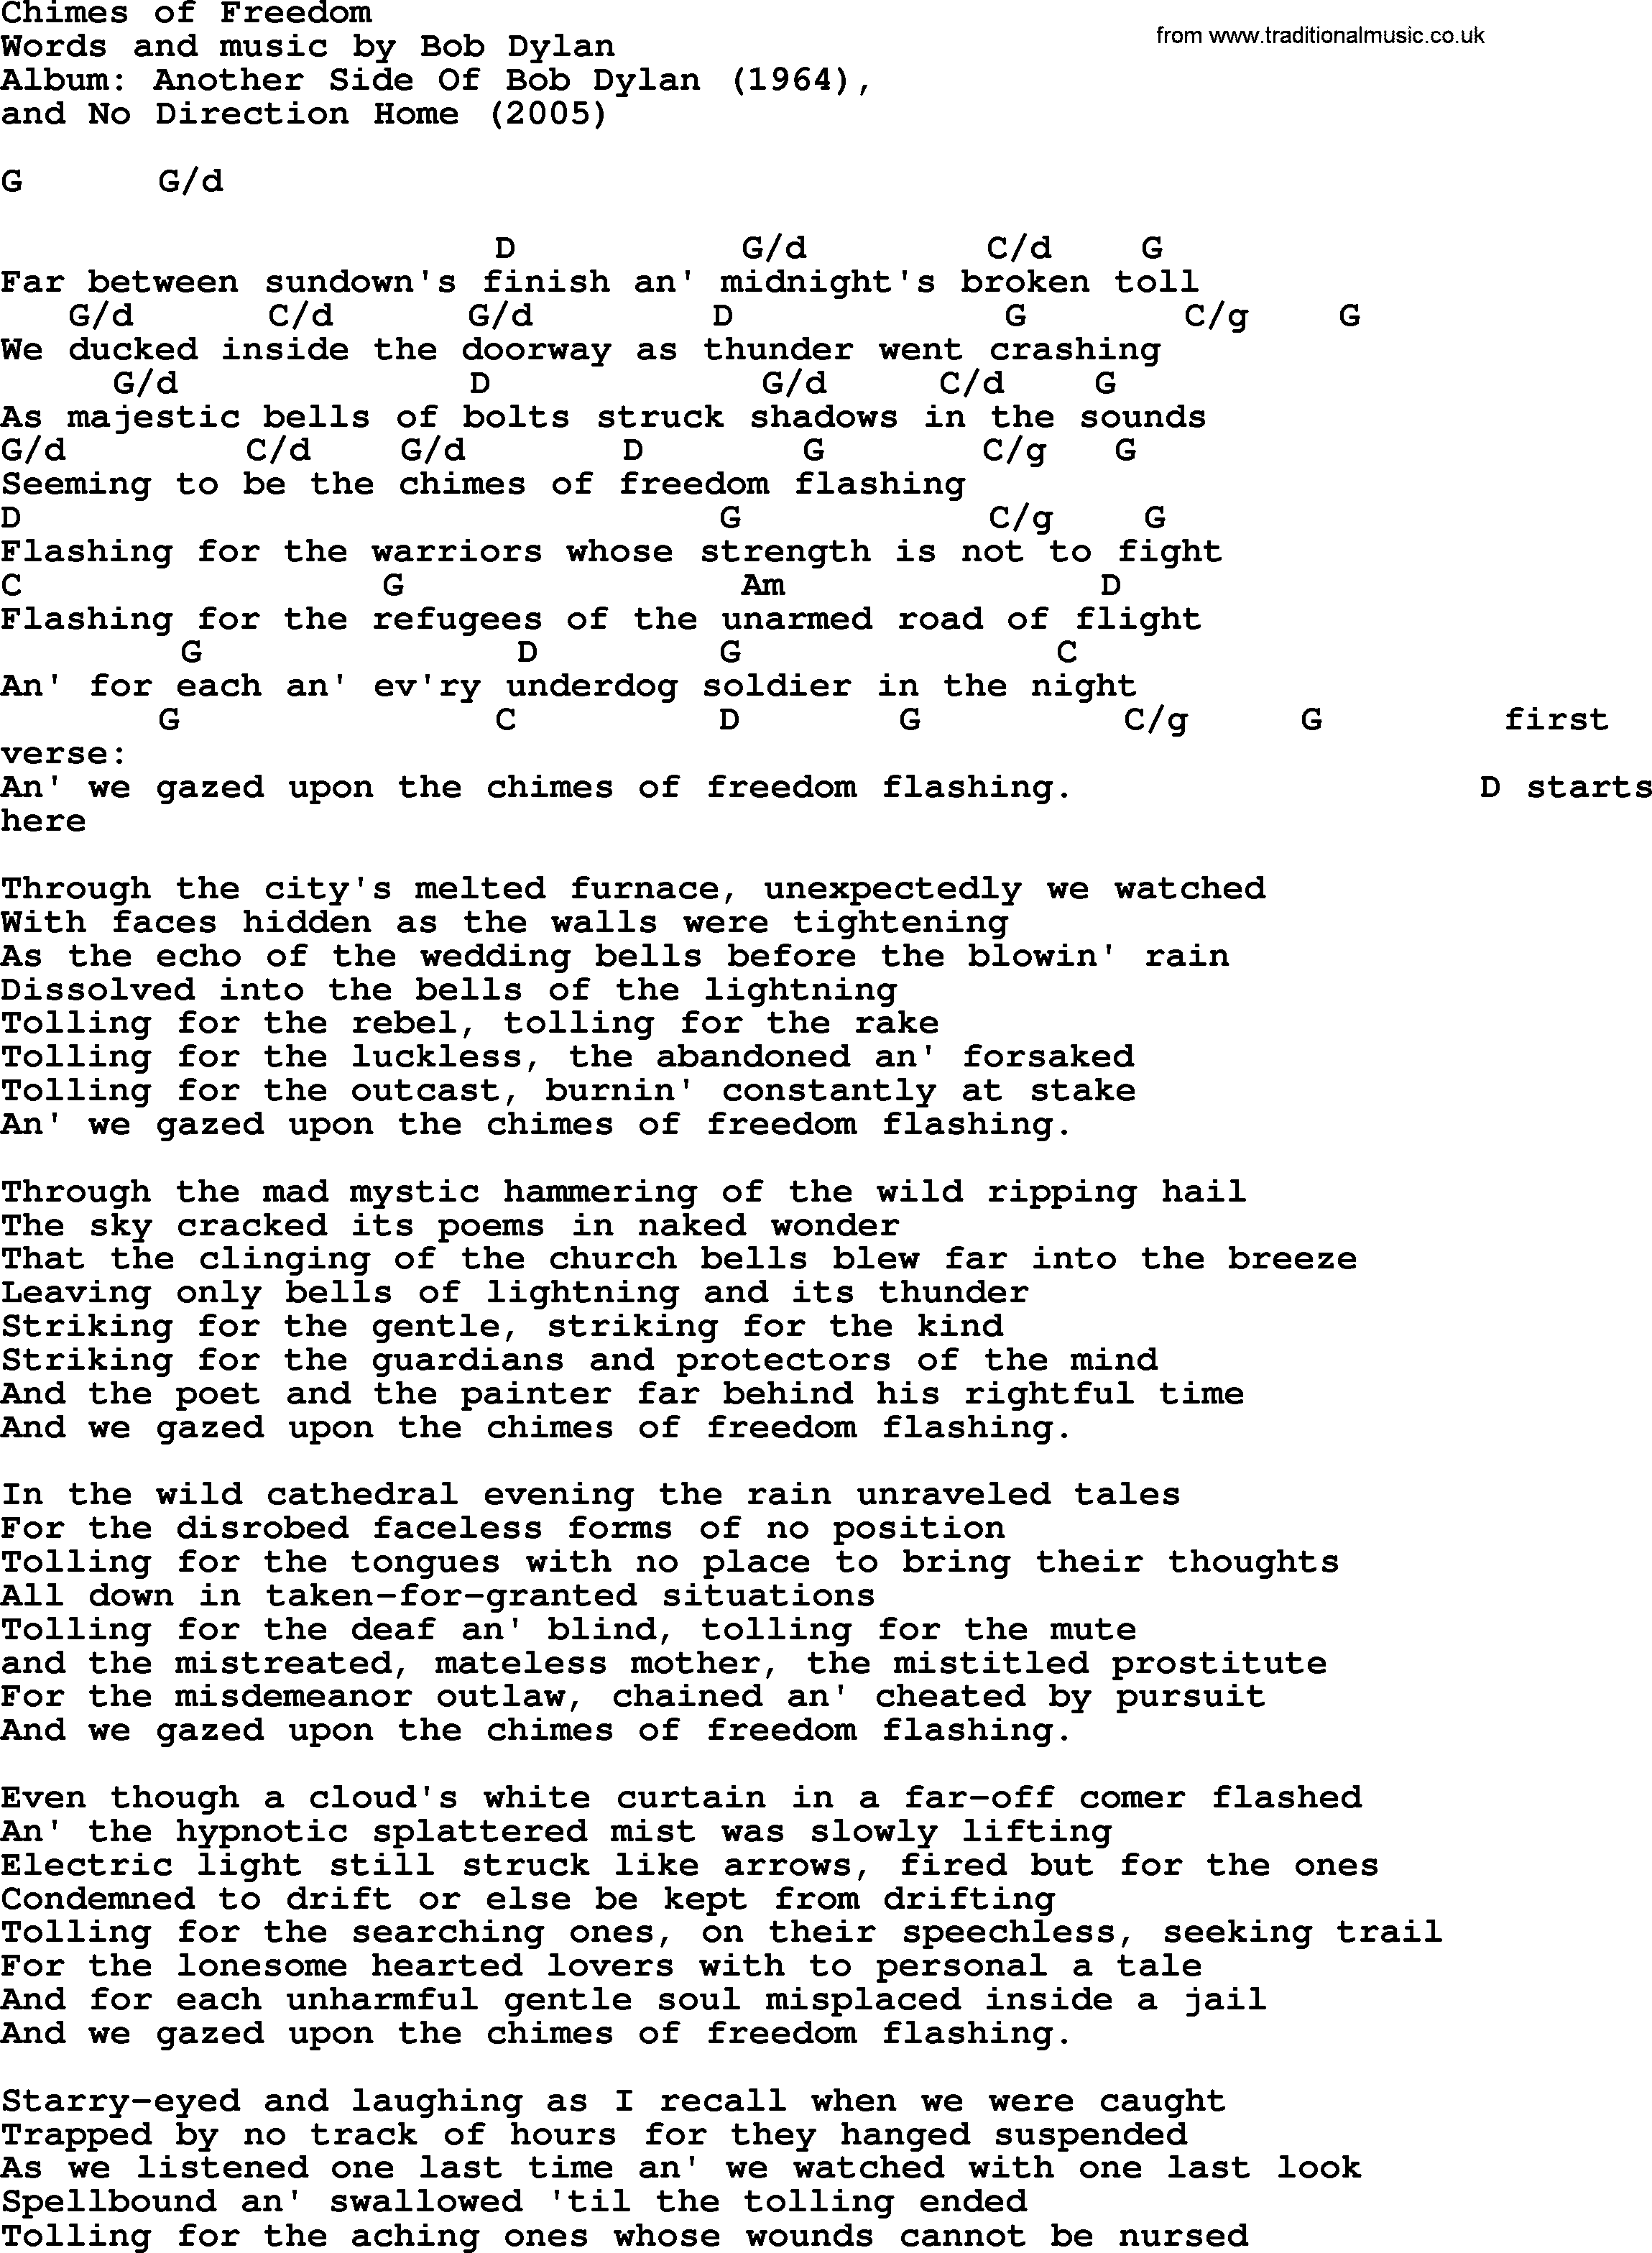 Bob Dylan song, lyrics with chords - Chimes of Freedom